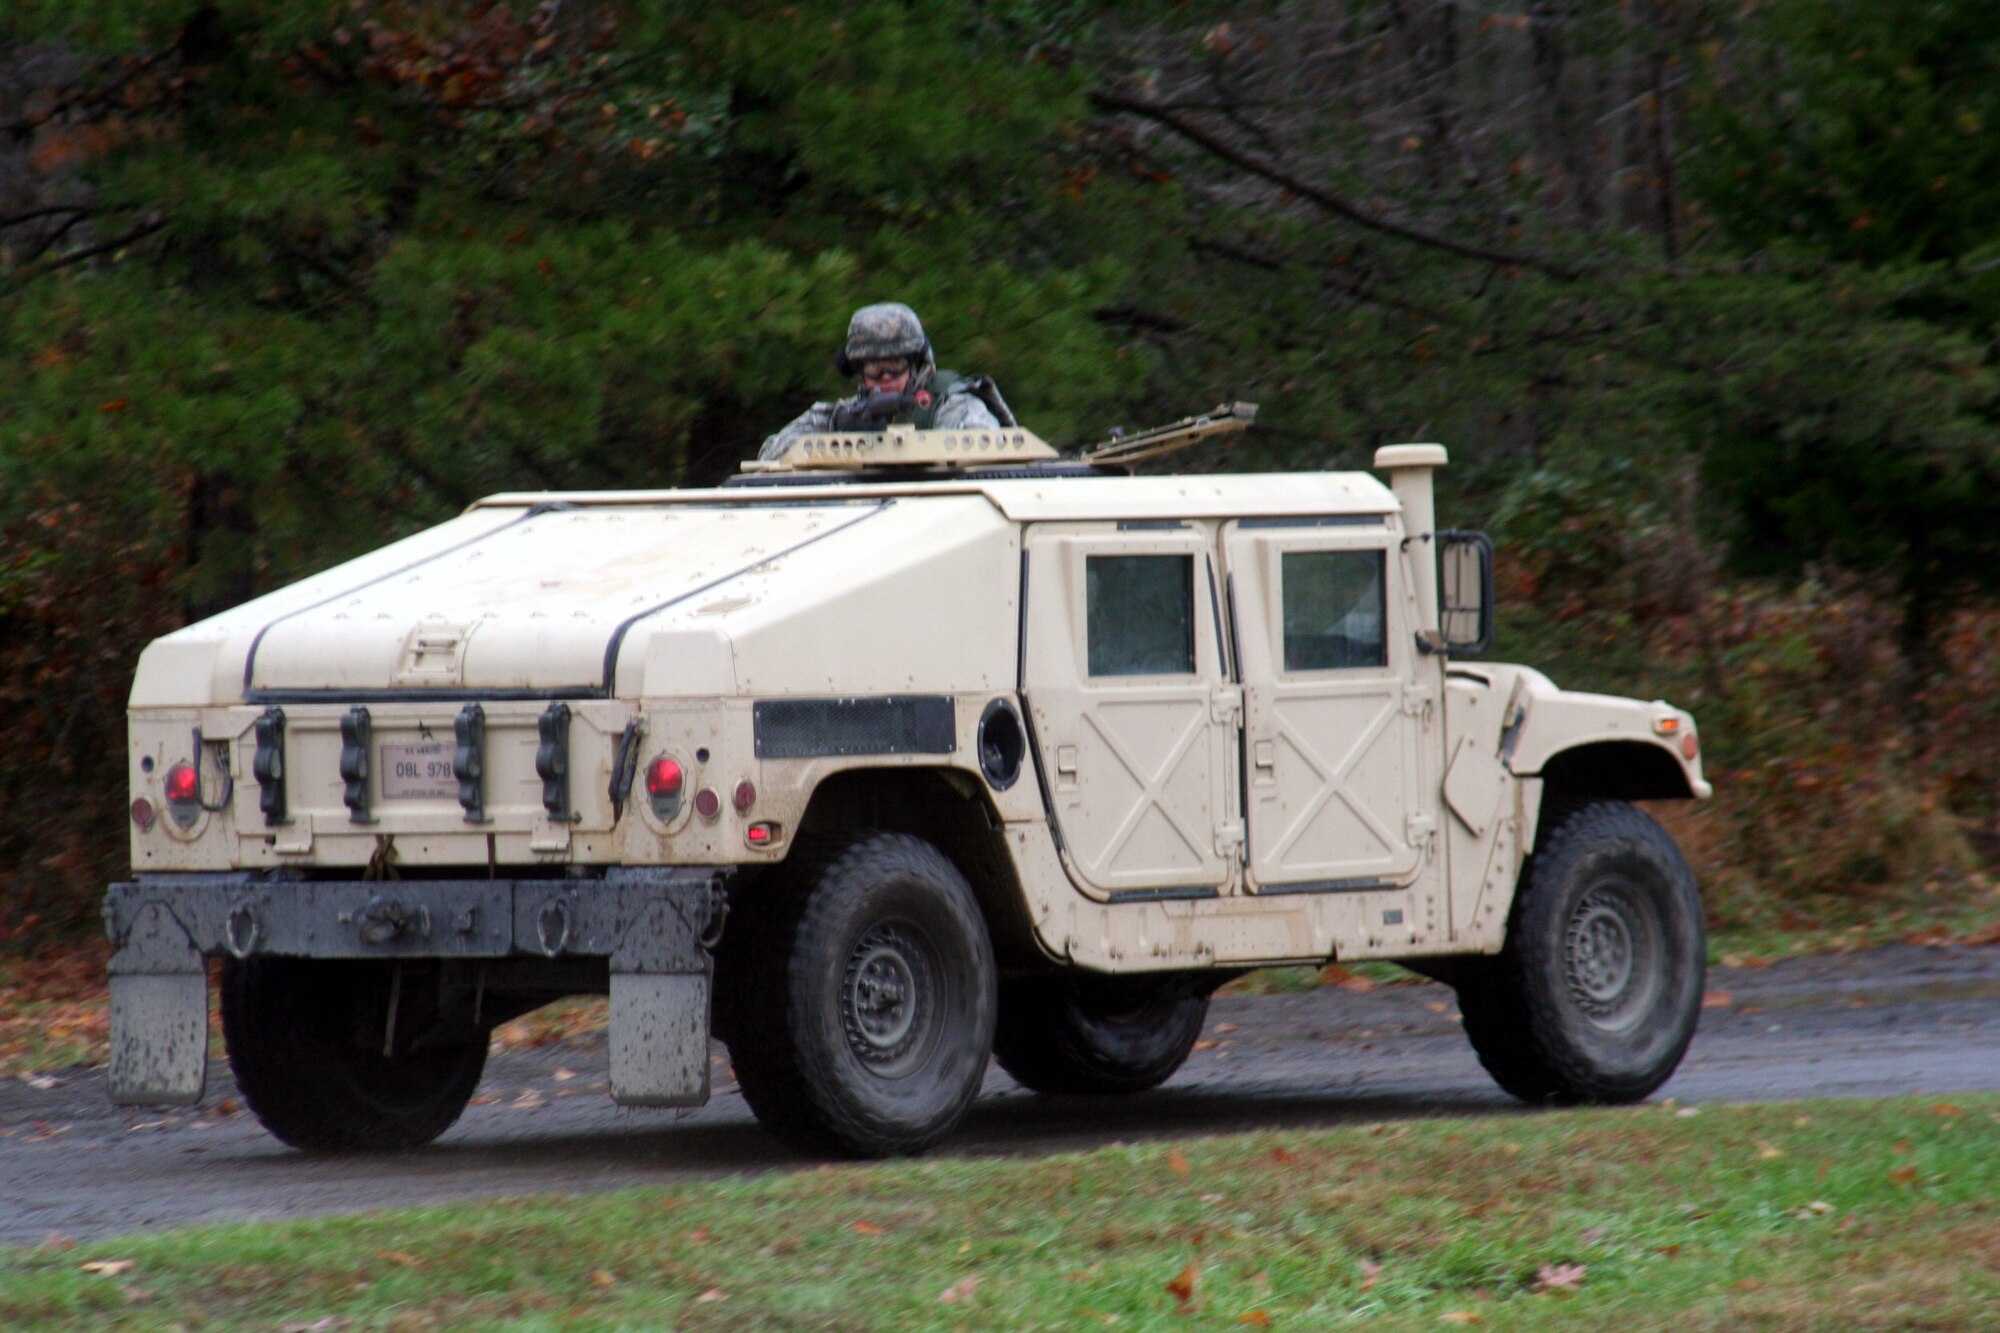 Students in the Combat Airman Skills Training Course 10-1A move out for mounted patrol, or convoy operations, training during a course session on Nov. 12, 2009, on a range at Joint Base McGuire-Dix-Lakehurst, N.J.  The course, taught by the U.S. Air Force Expeditionary Center's 421st Combat Training Squadron, prepares Airmen for upcoming deployments.  (U.S. Air Force Photo/Tech. Sgt. Scott T. Sturkol)